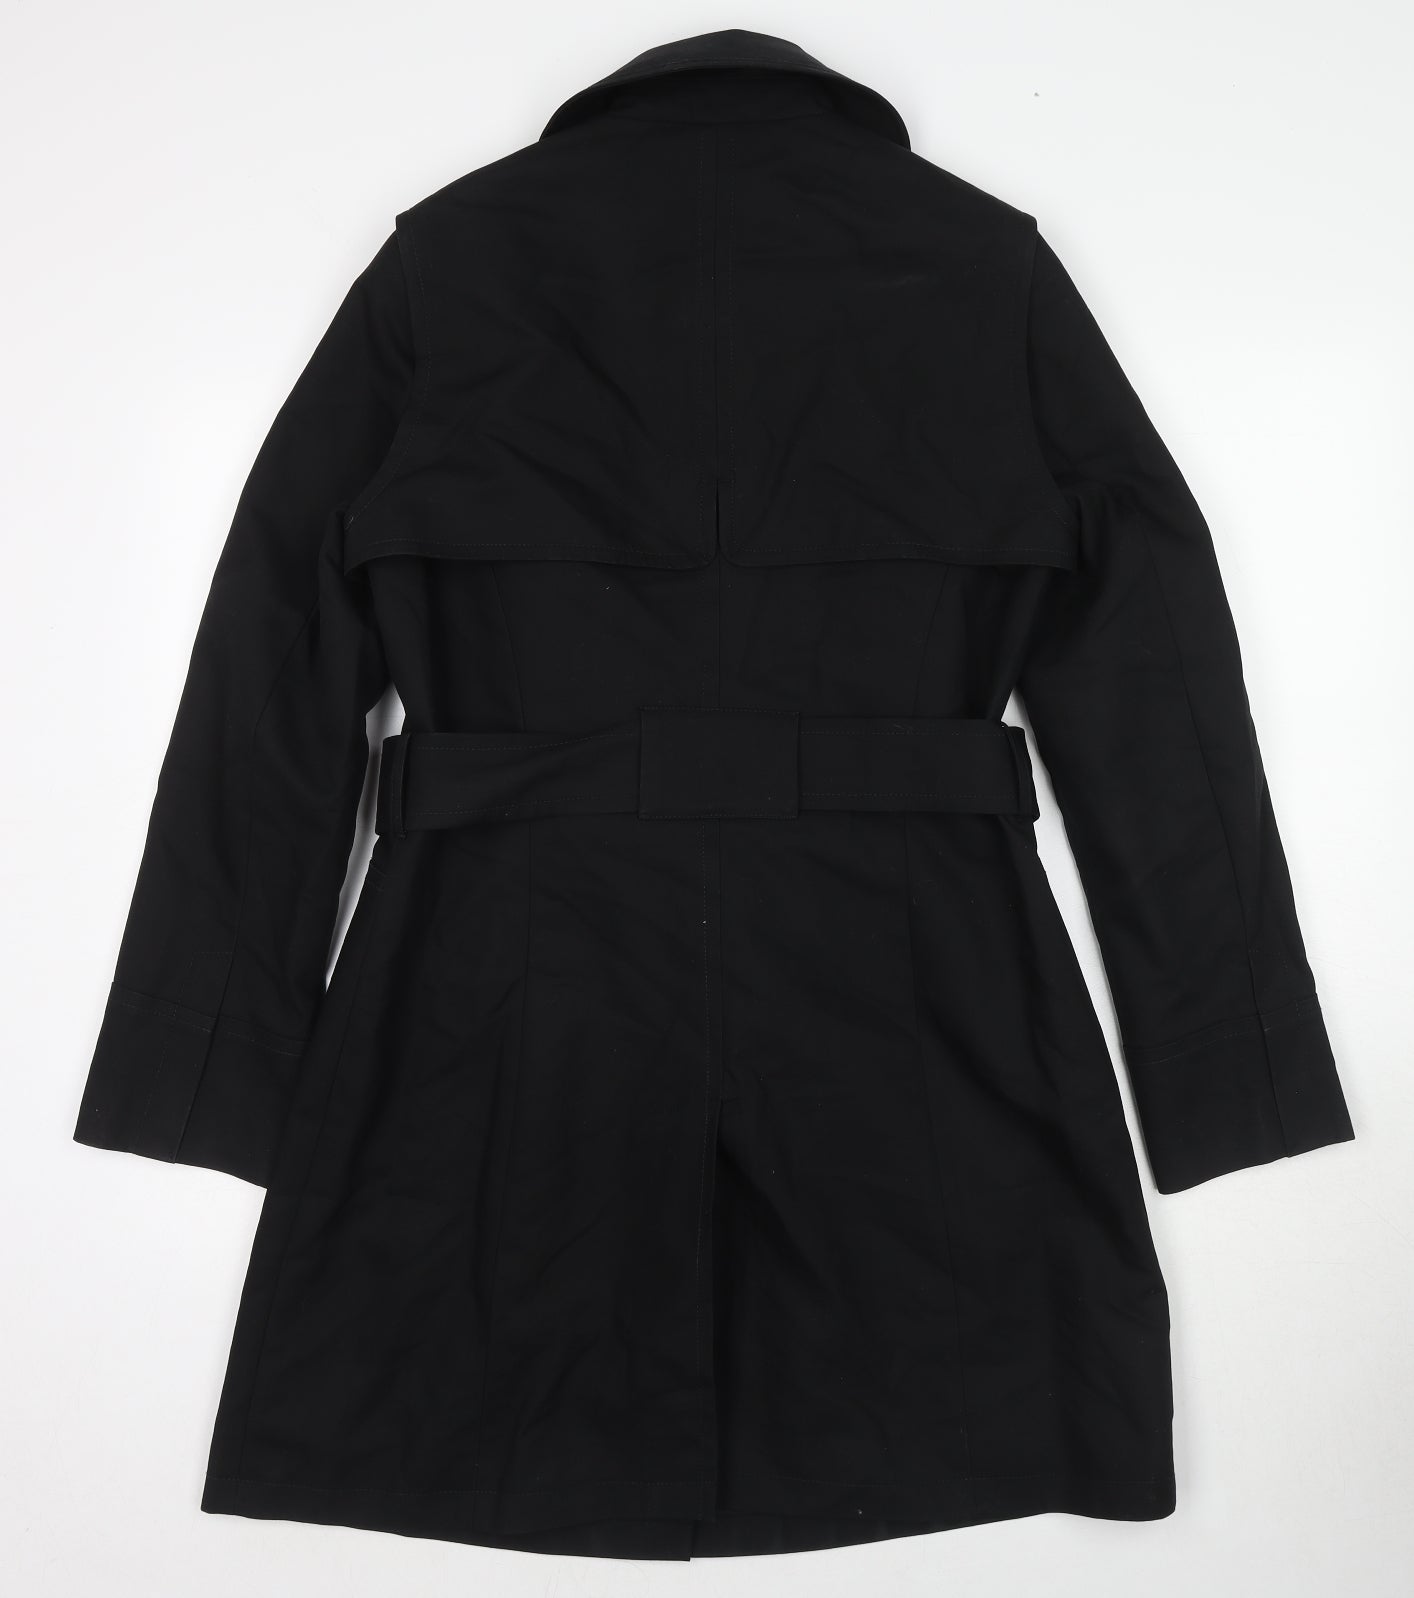 Marks and Spencer Womens Black Trench Coat Coat Size 12 Button